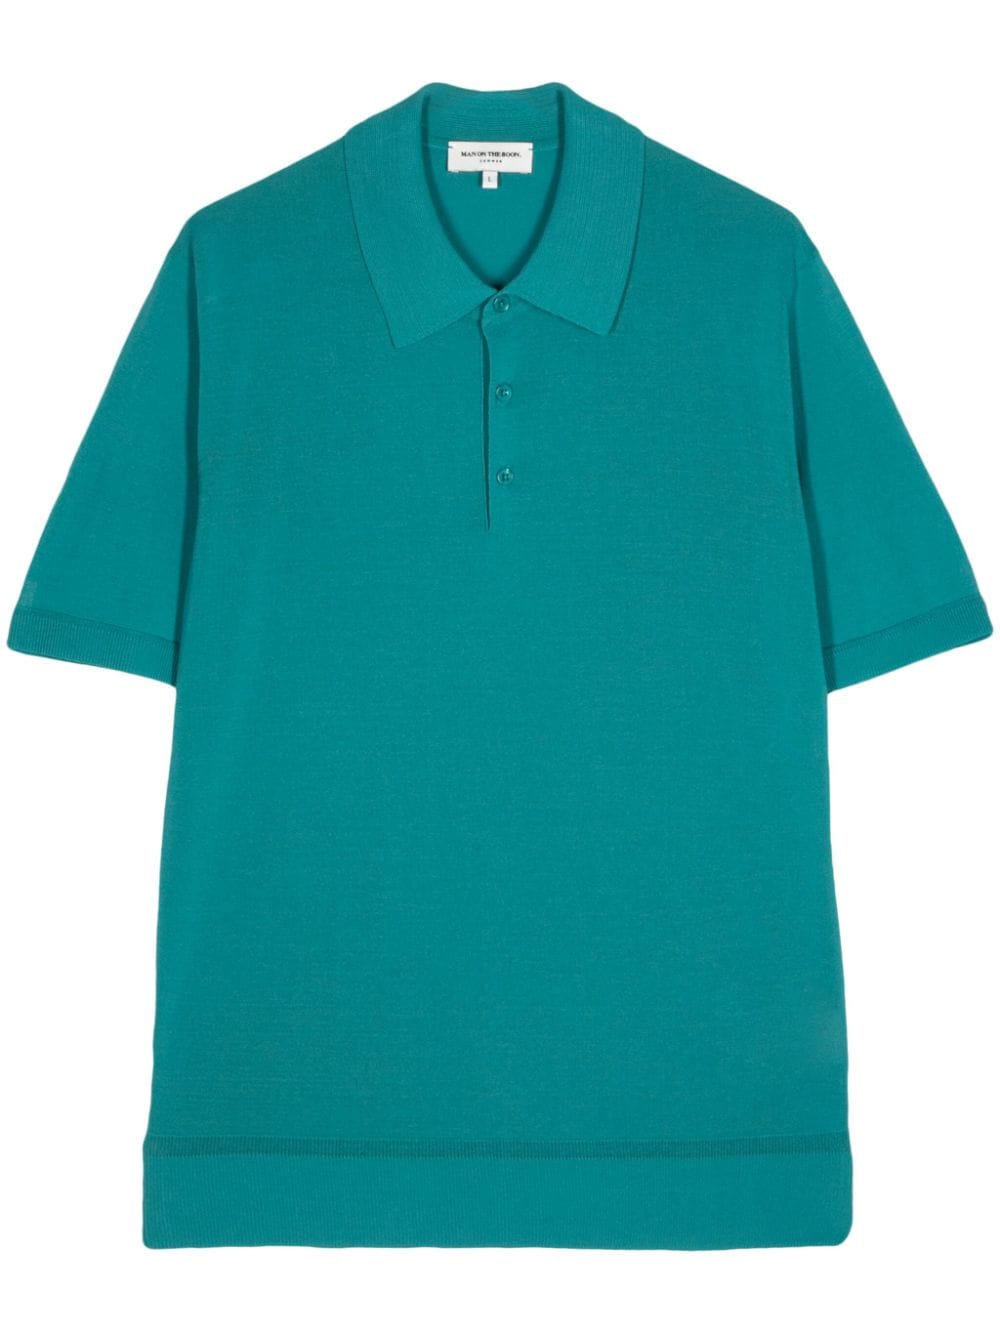 Man On The Boon. Short-sleeve Polo Shirt In Green